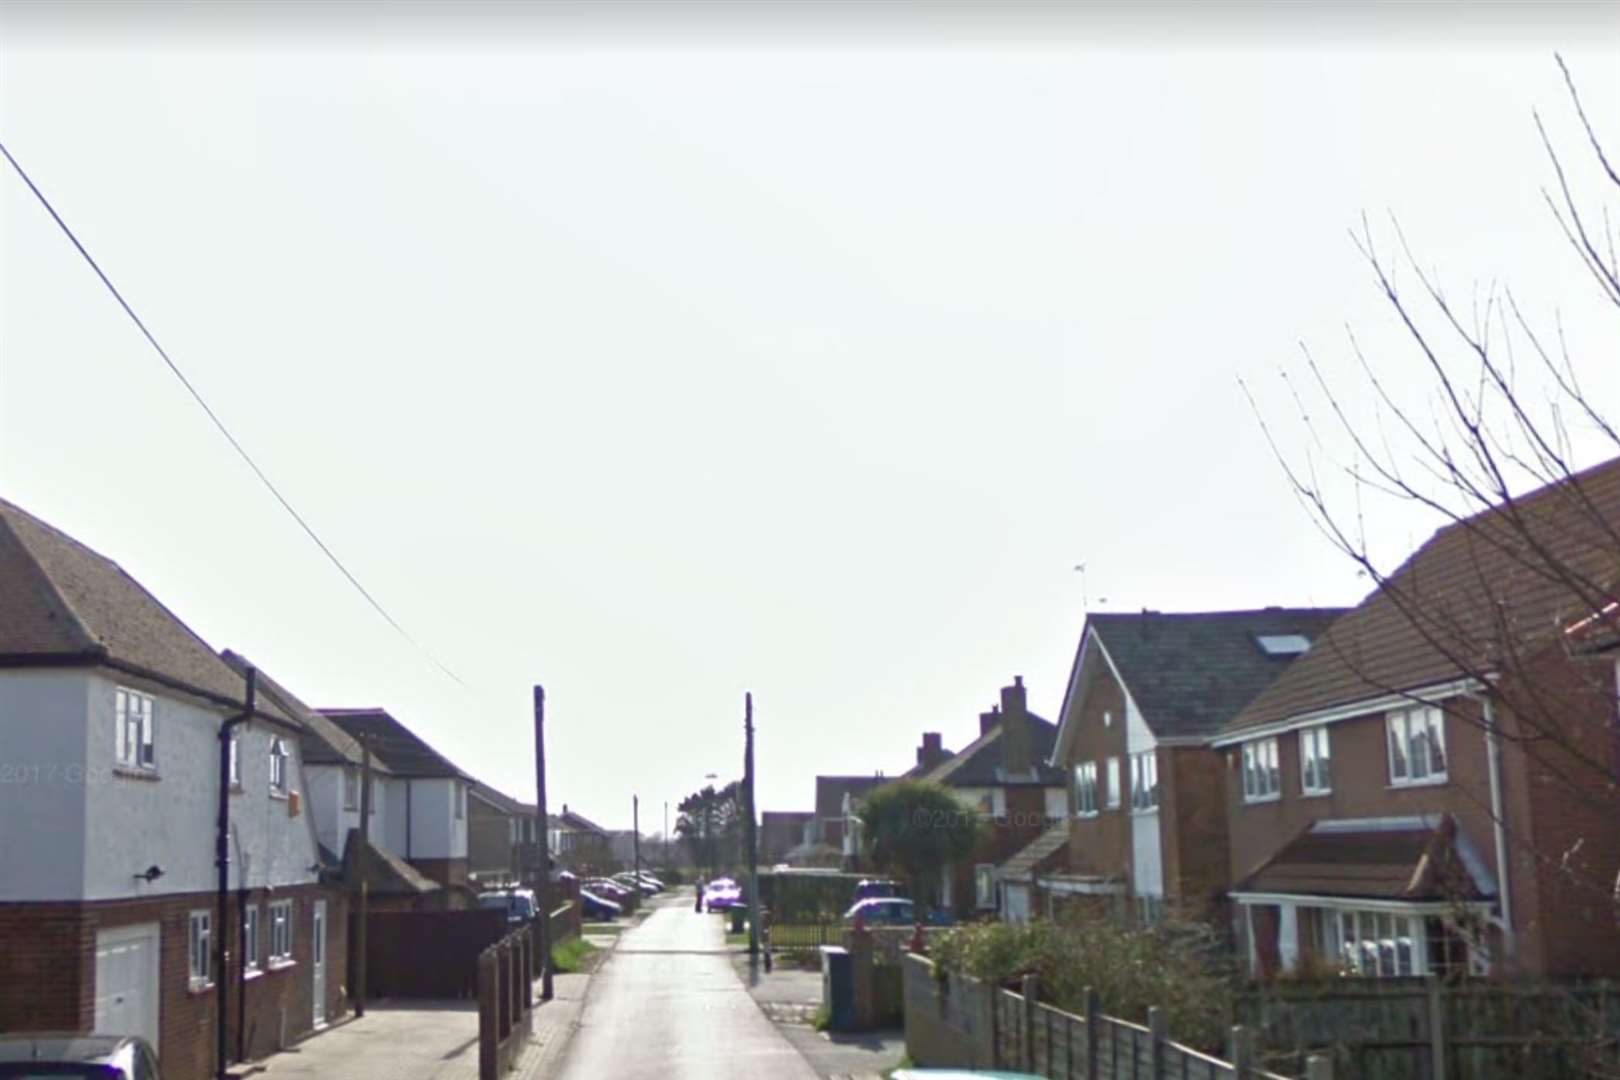 Fire crews attended a blaze in High Knocke, Dymchurch this morning. Picture: Google